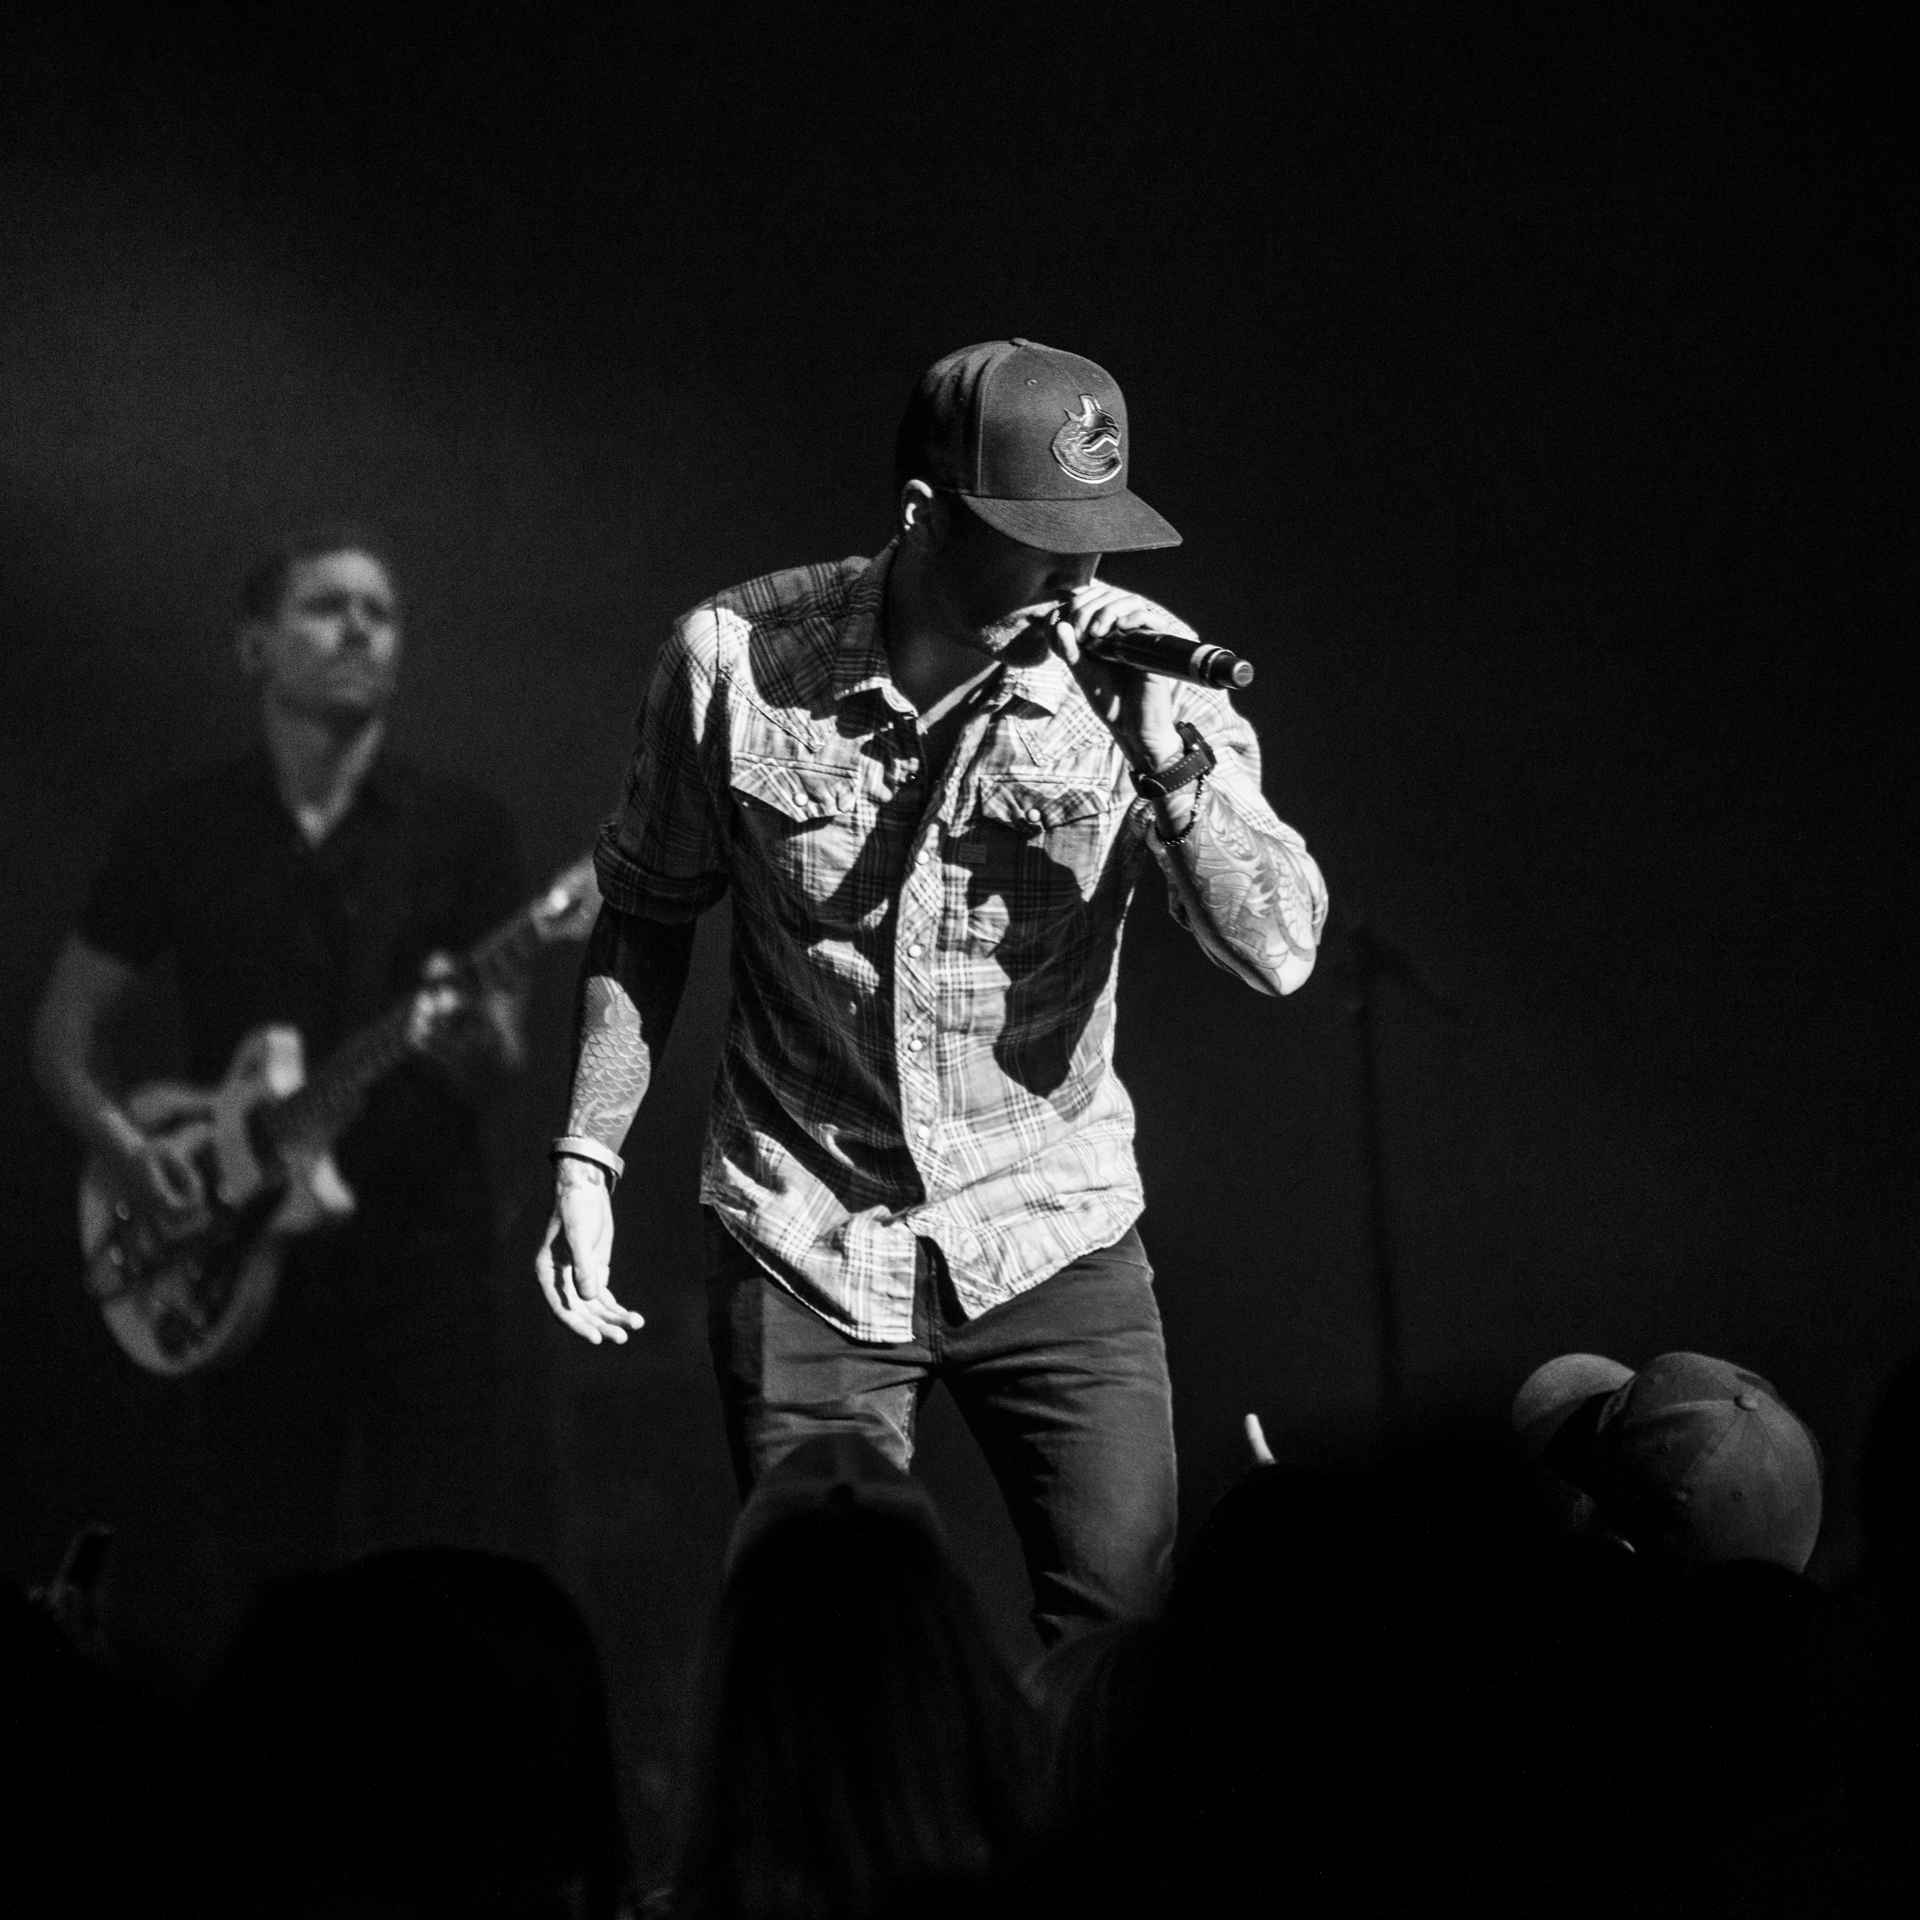 Dallas Smith takes center stage, singing into a microphone, while in the background, a man passionately plays an electric guitar. The black and white photo captures the essence of the musical performance, emphasizing the timeless and emotive nature of the scene.